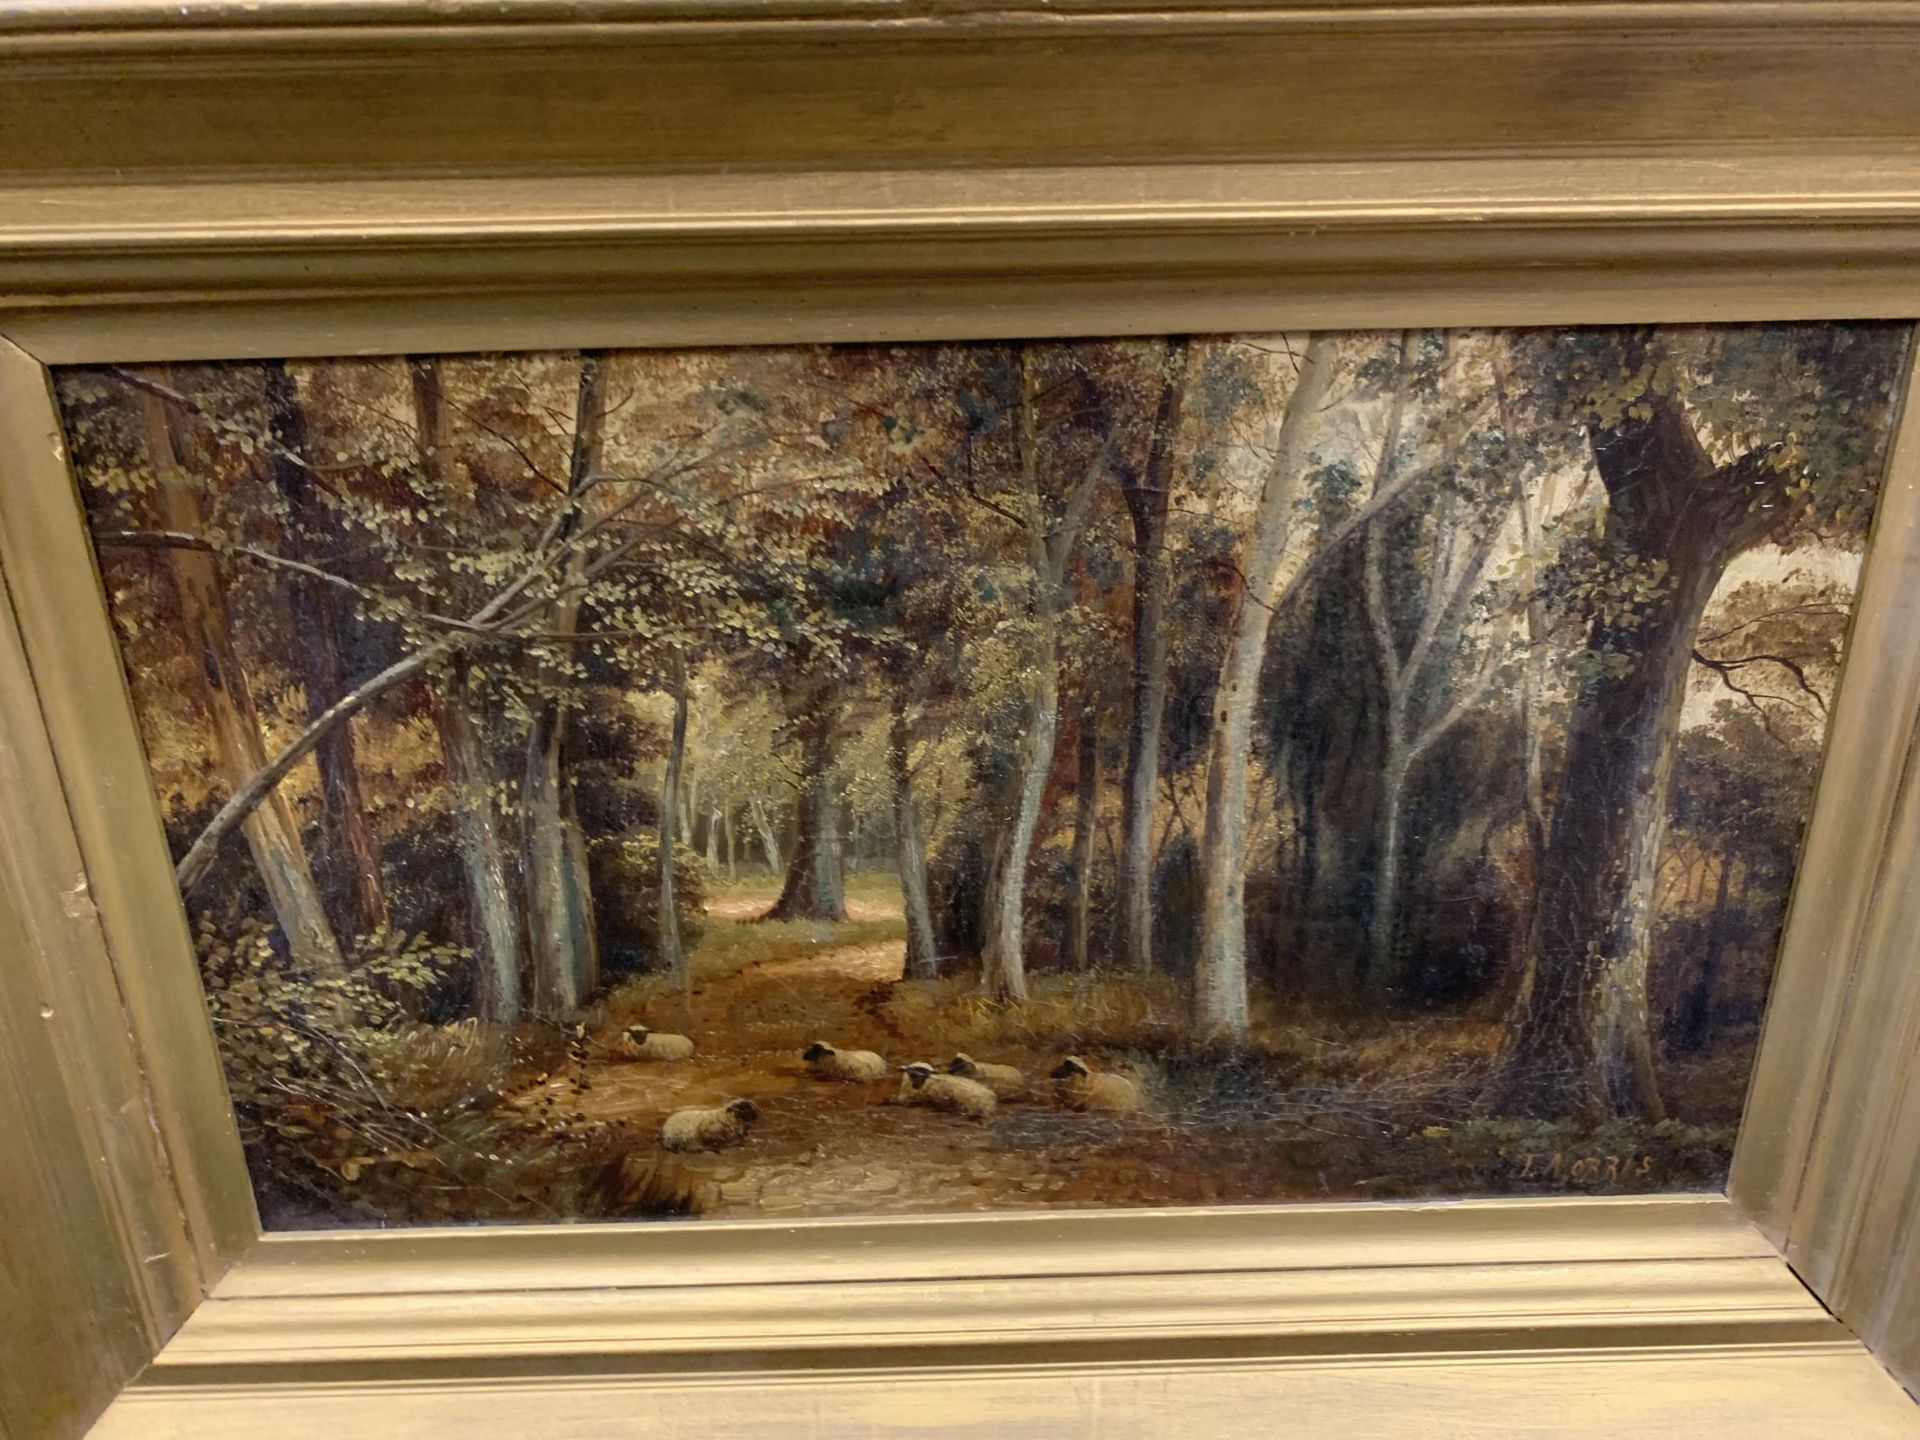 A GILT FRAMED OIL PAINTING OF SHEEP IN A FOREST LANDSCAPE, SIGNED J.MORRIS, 47 X 68CM - Image 3 of 8